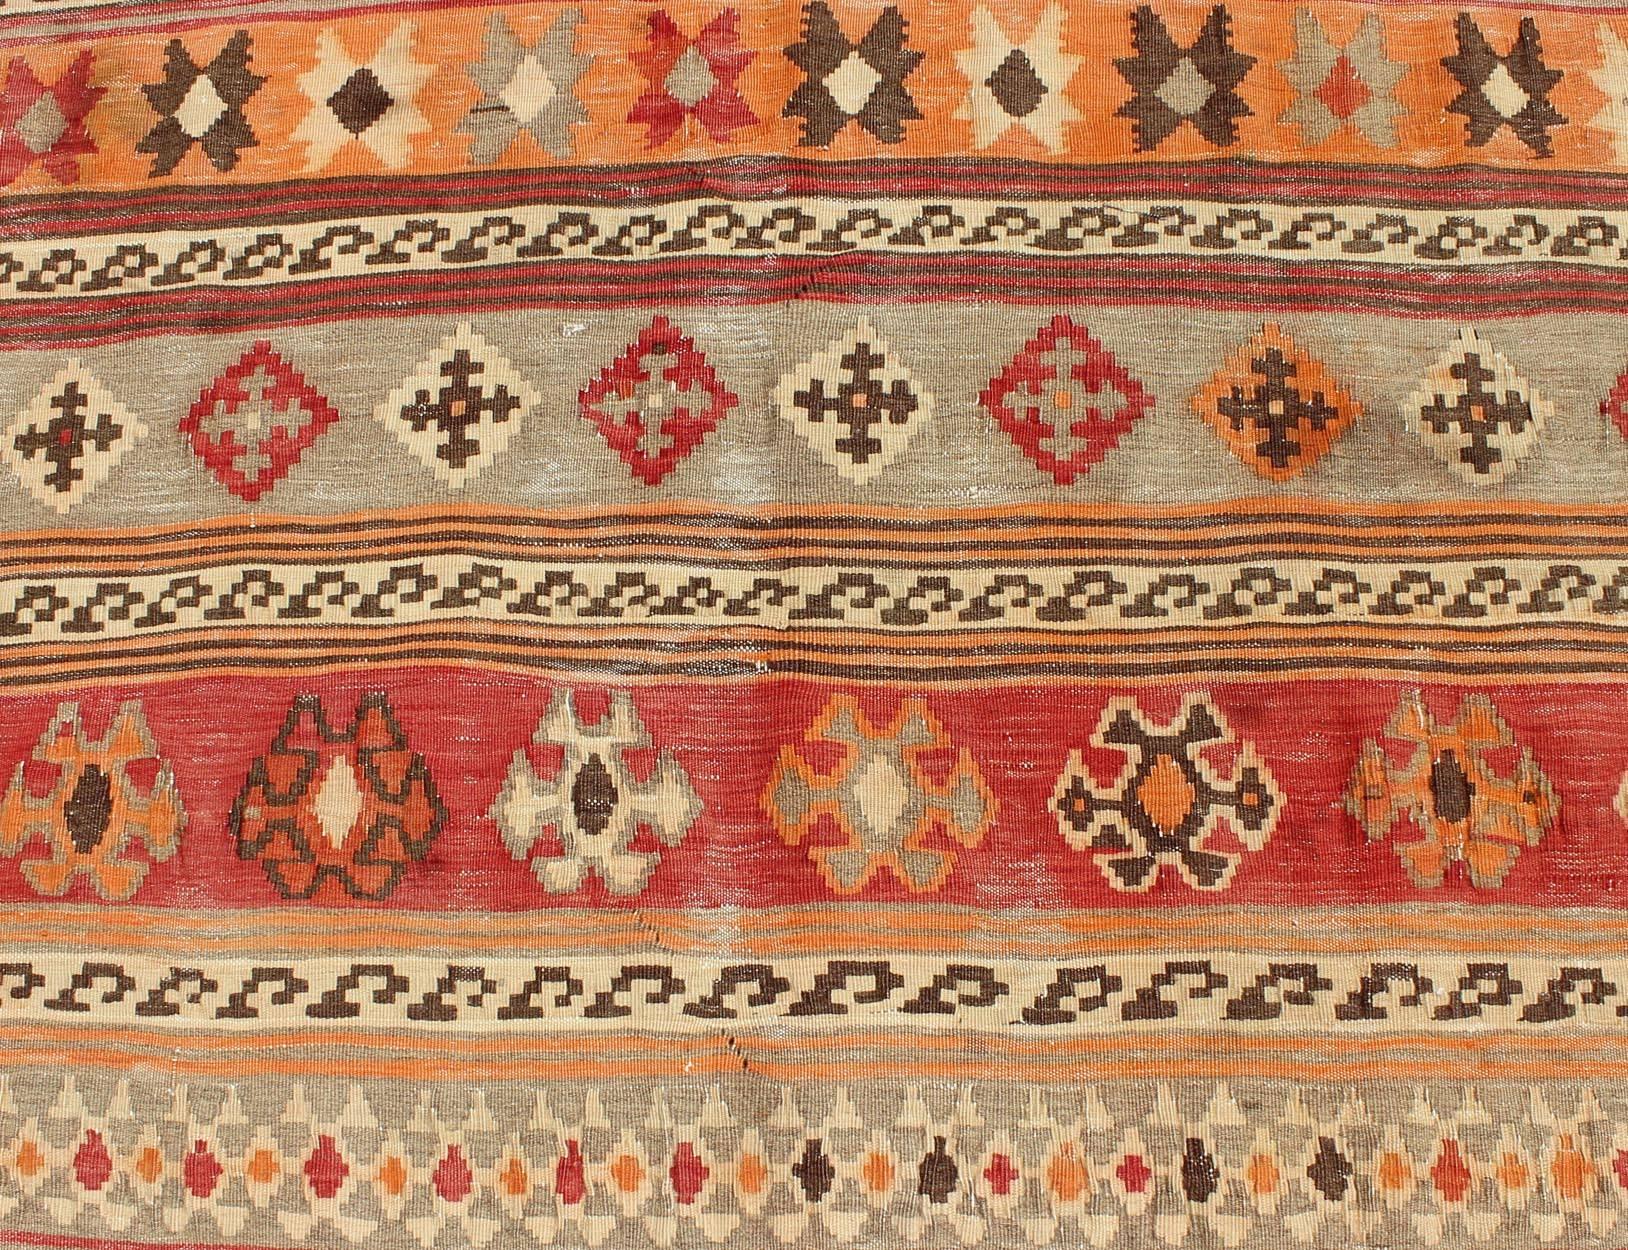 Antique Moroccan Kilim with Embroidery in Red, Orange, Gray and Brown For Sale 4